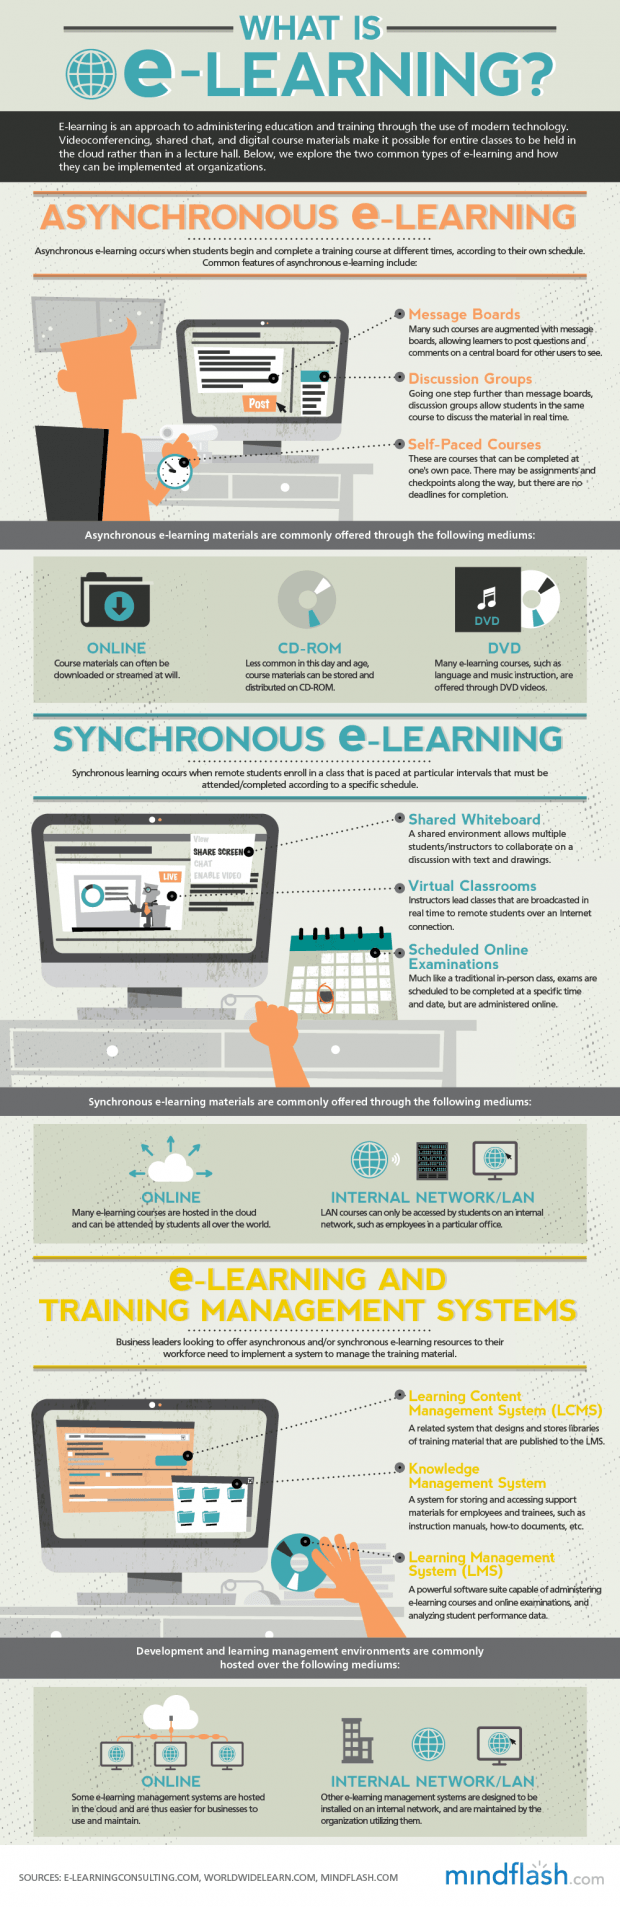 Synchronous-and-Asynchronous-E-Learning-Infographic